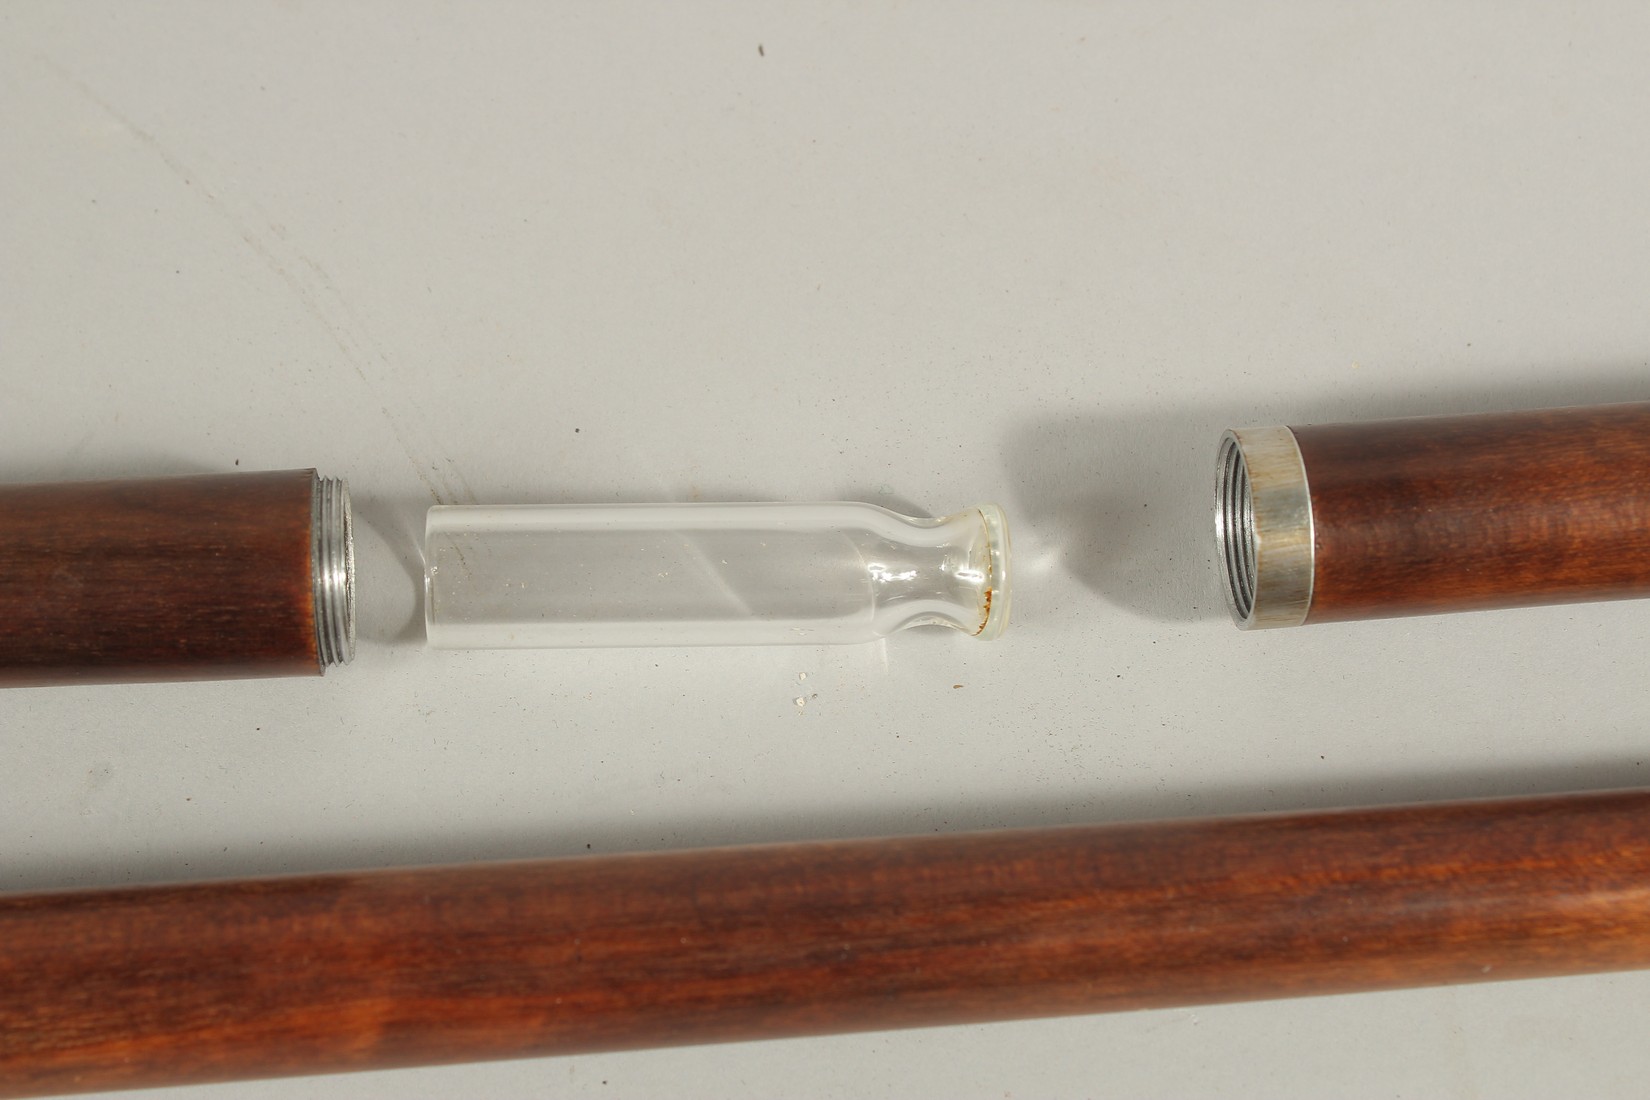 A RARE 19TH CENTURY WALKING STICK with metal top and two screw off sections revealing a long glass - Image 4 of 7